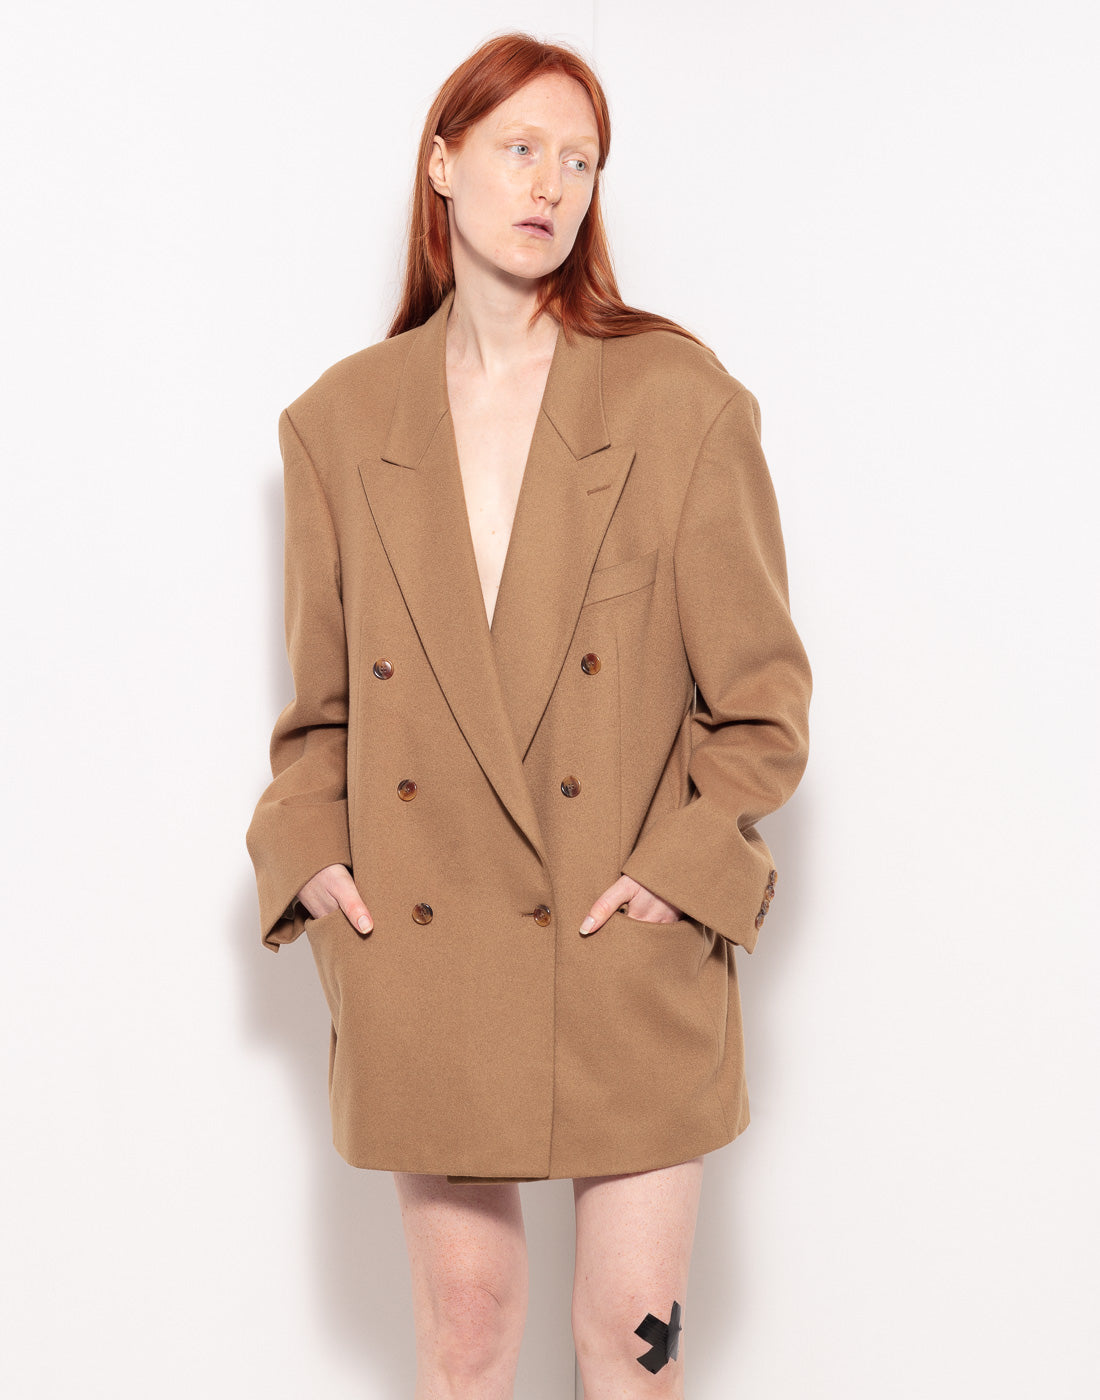 Vintage double breast oversized wool jacket in camel color